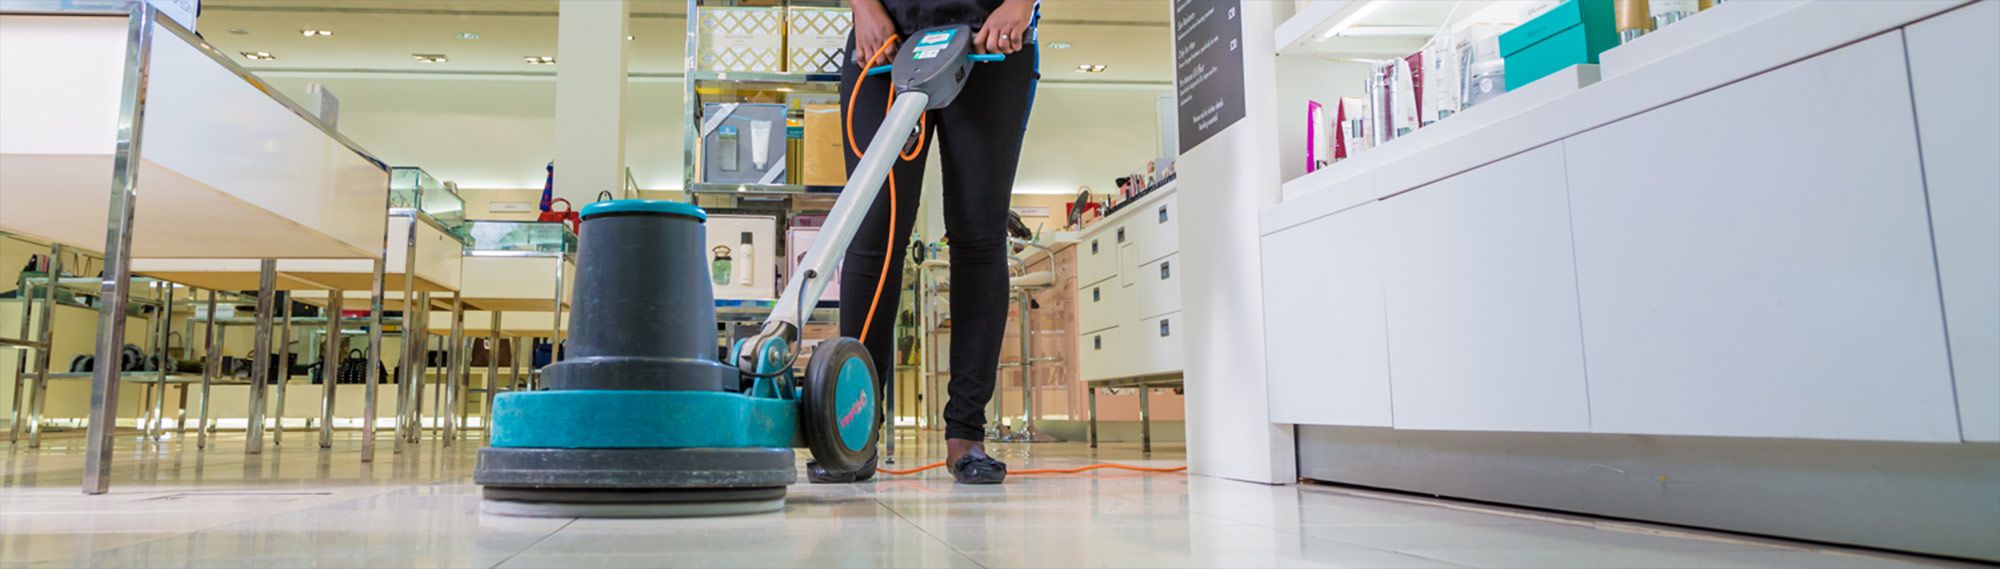 Commercial Cleaning Contractors | Contract Cleaning